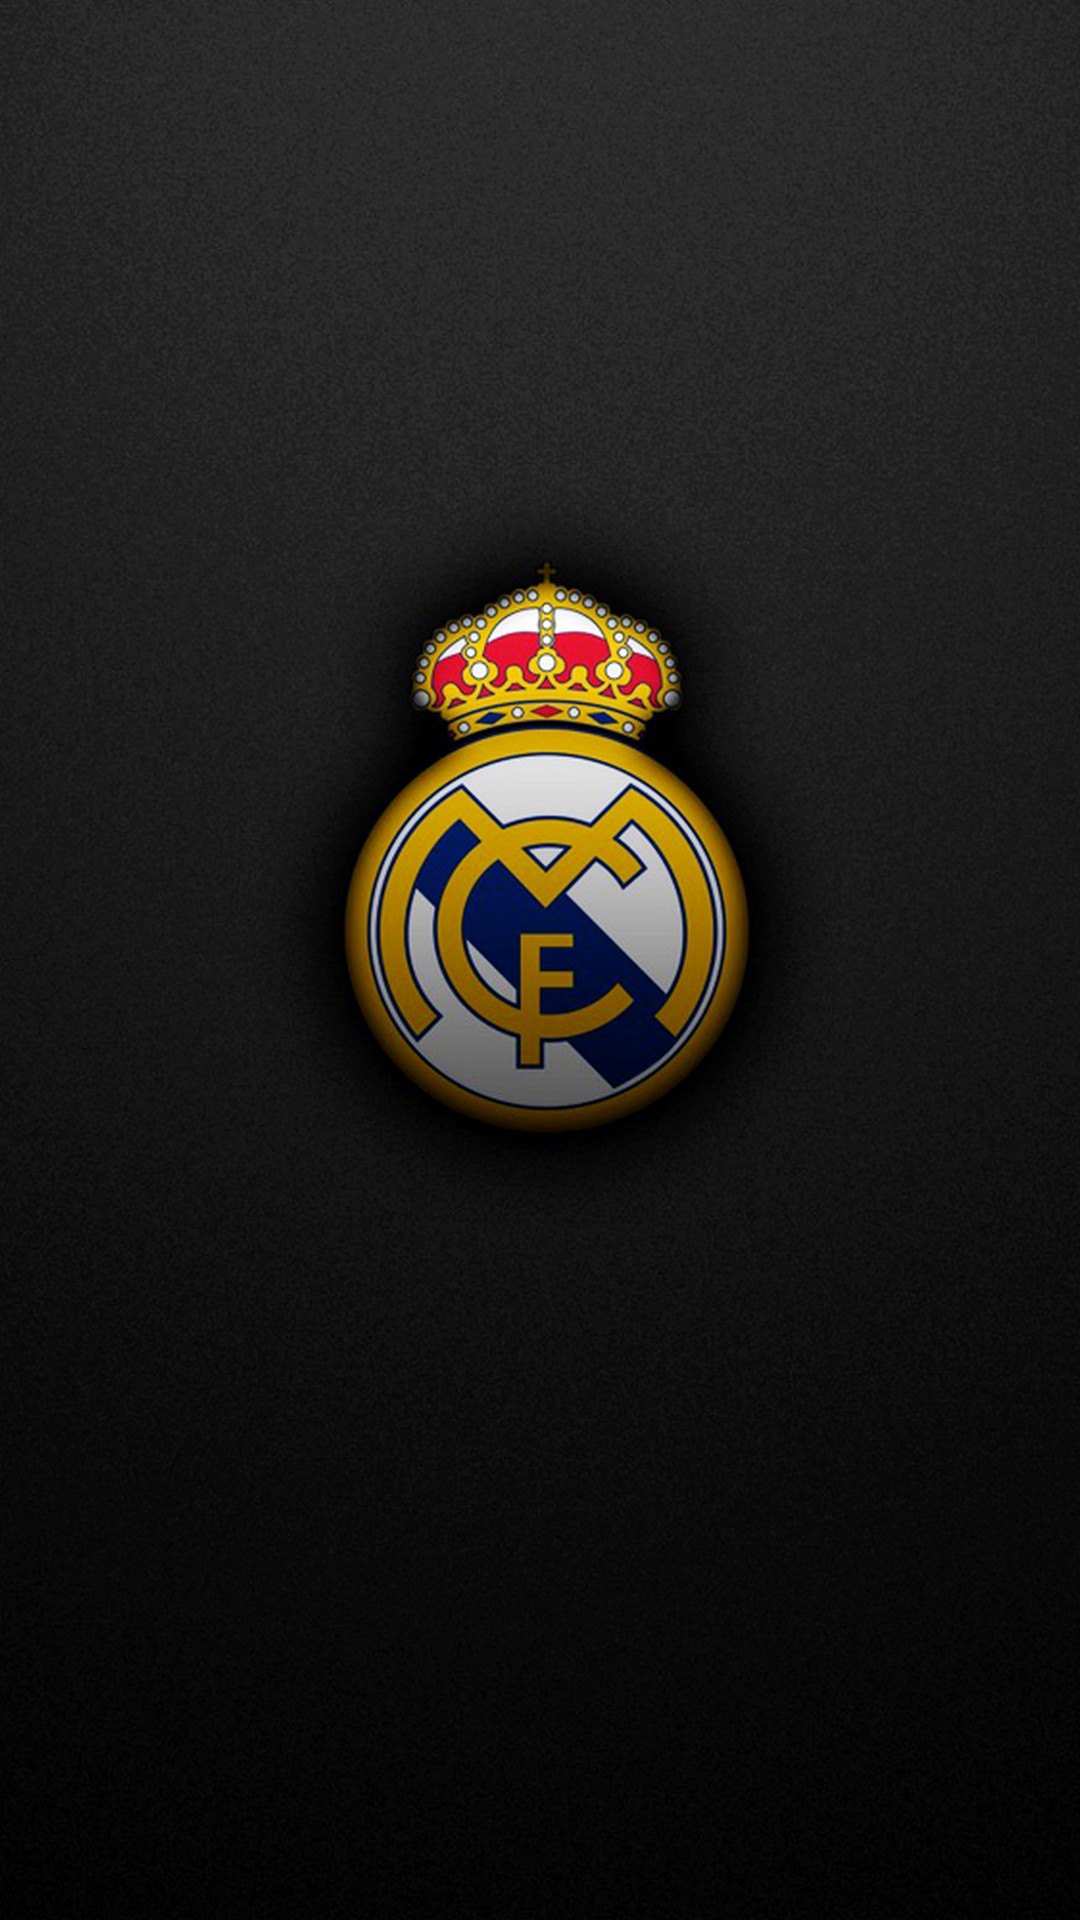 Black and White Phone 8 Wallpaper with high-resolution 1080x1920 pixel. Download all Mobile Wallpapers and Use them as wallpapers for your iPhone, Tablet, iPad, Android and other mobile devices